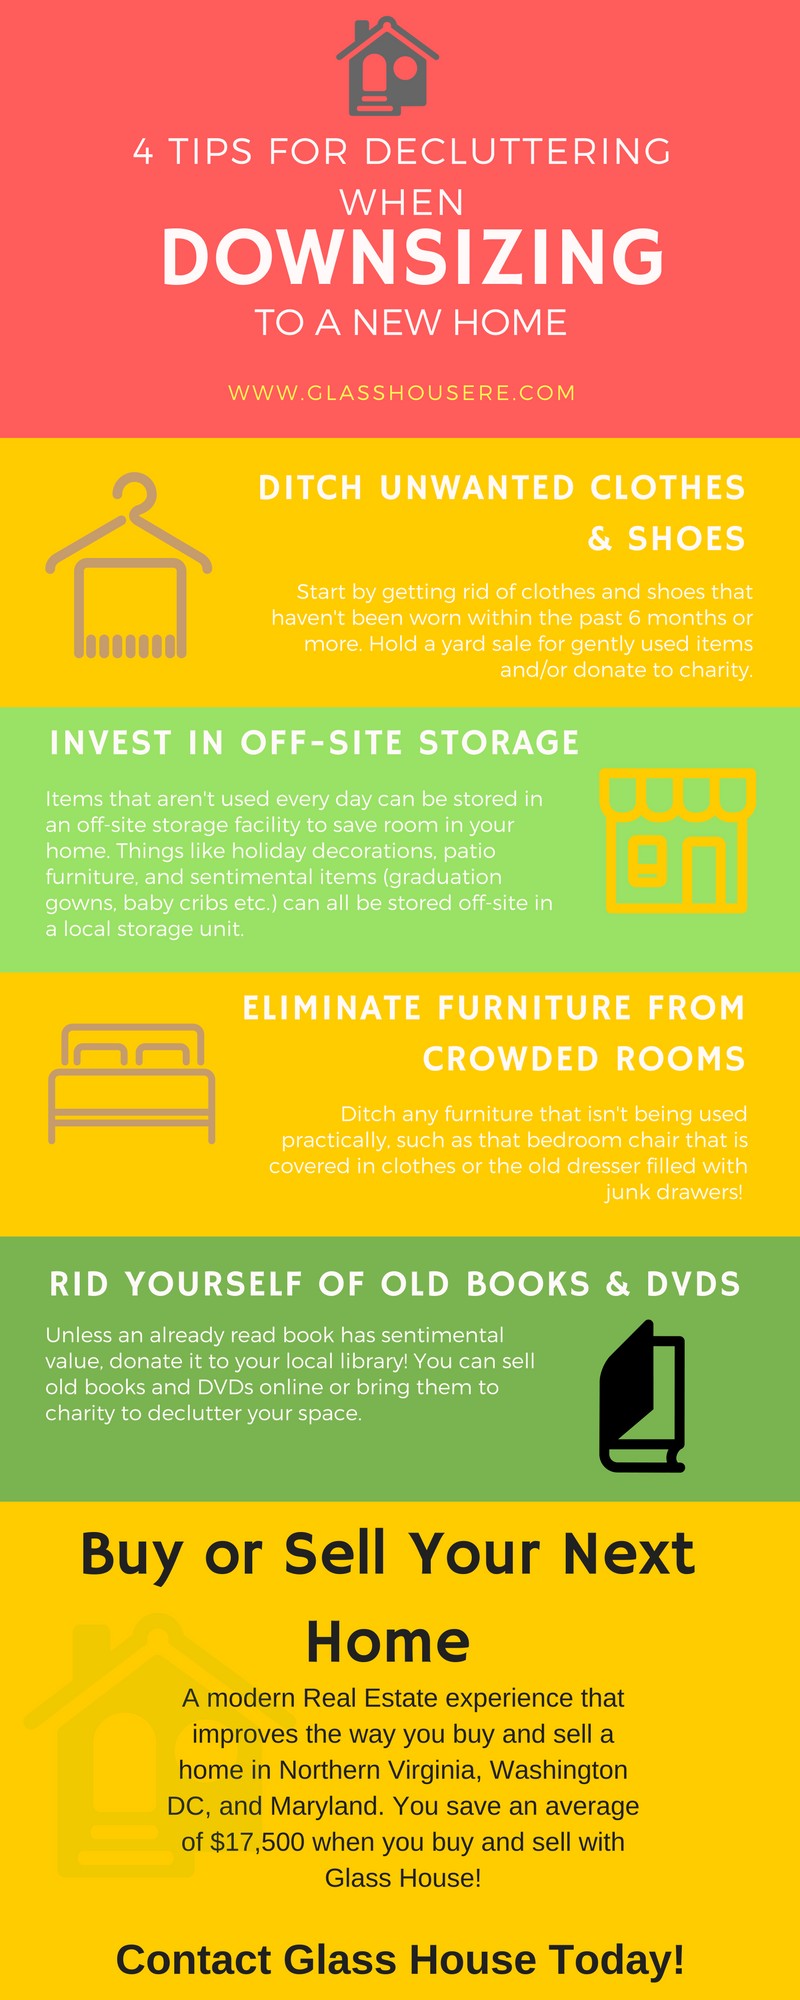 4-tips-for-decluttering-when-downsizing-to-a-new-home-infographic